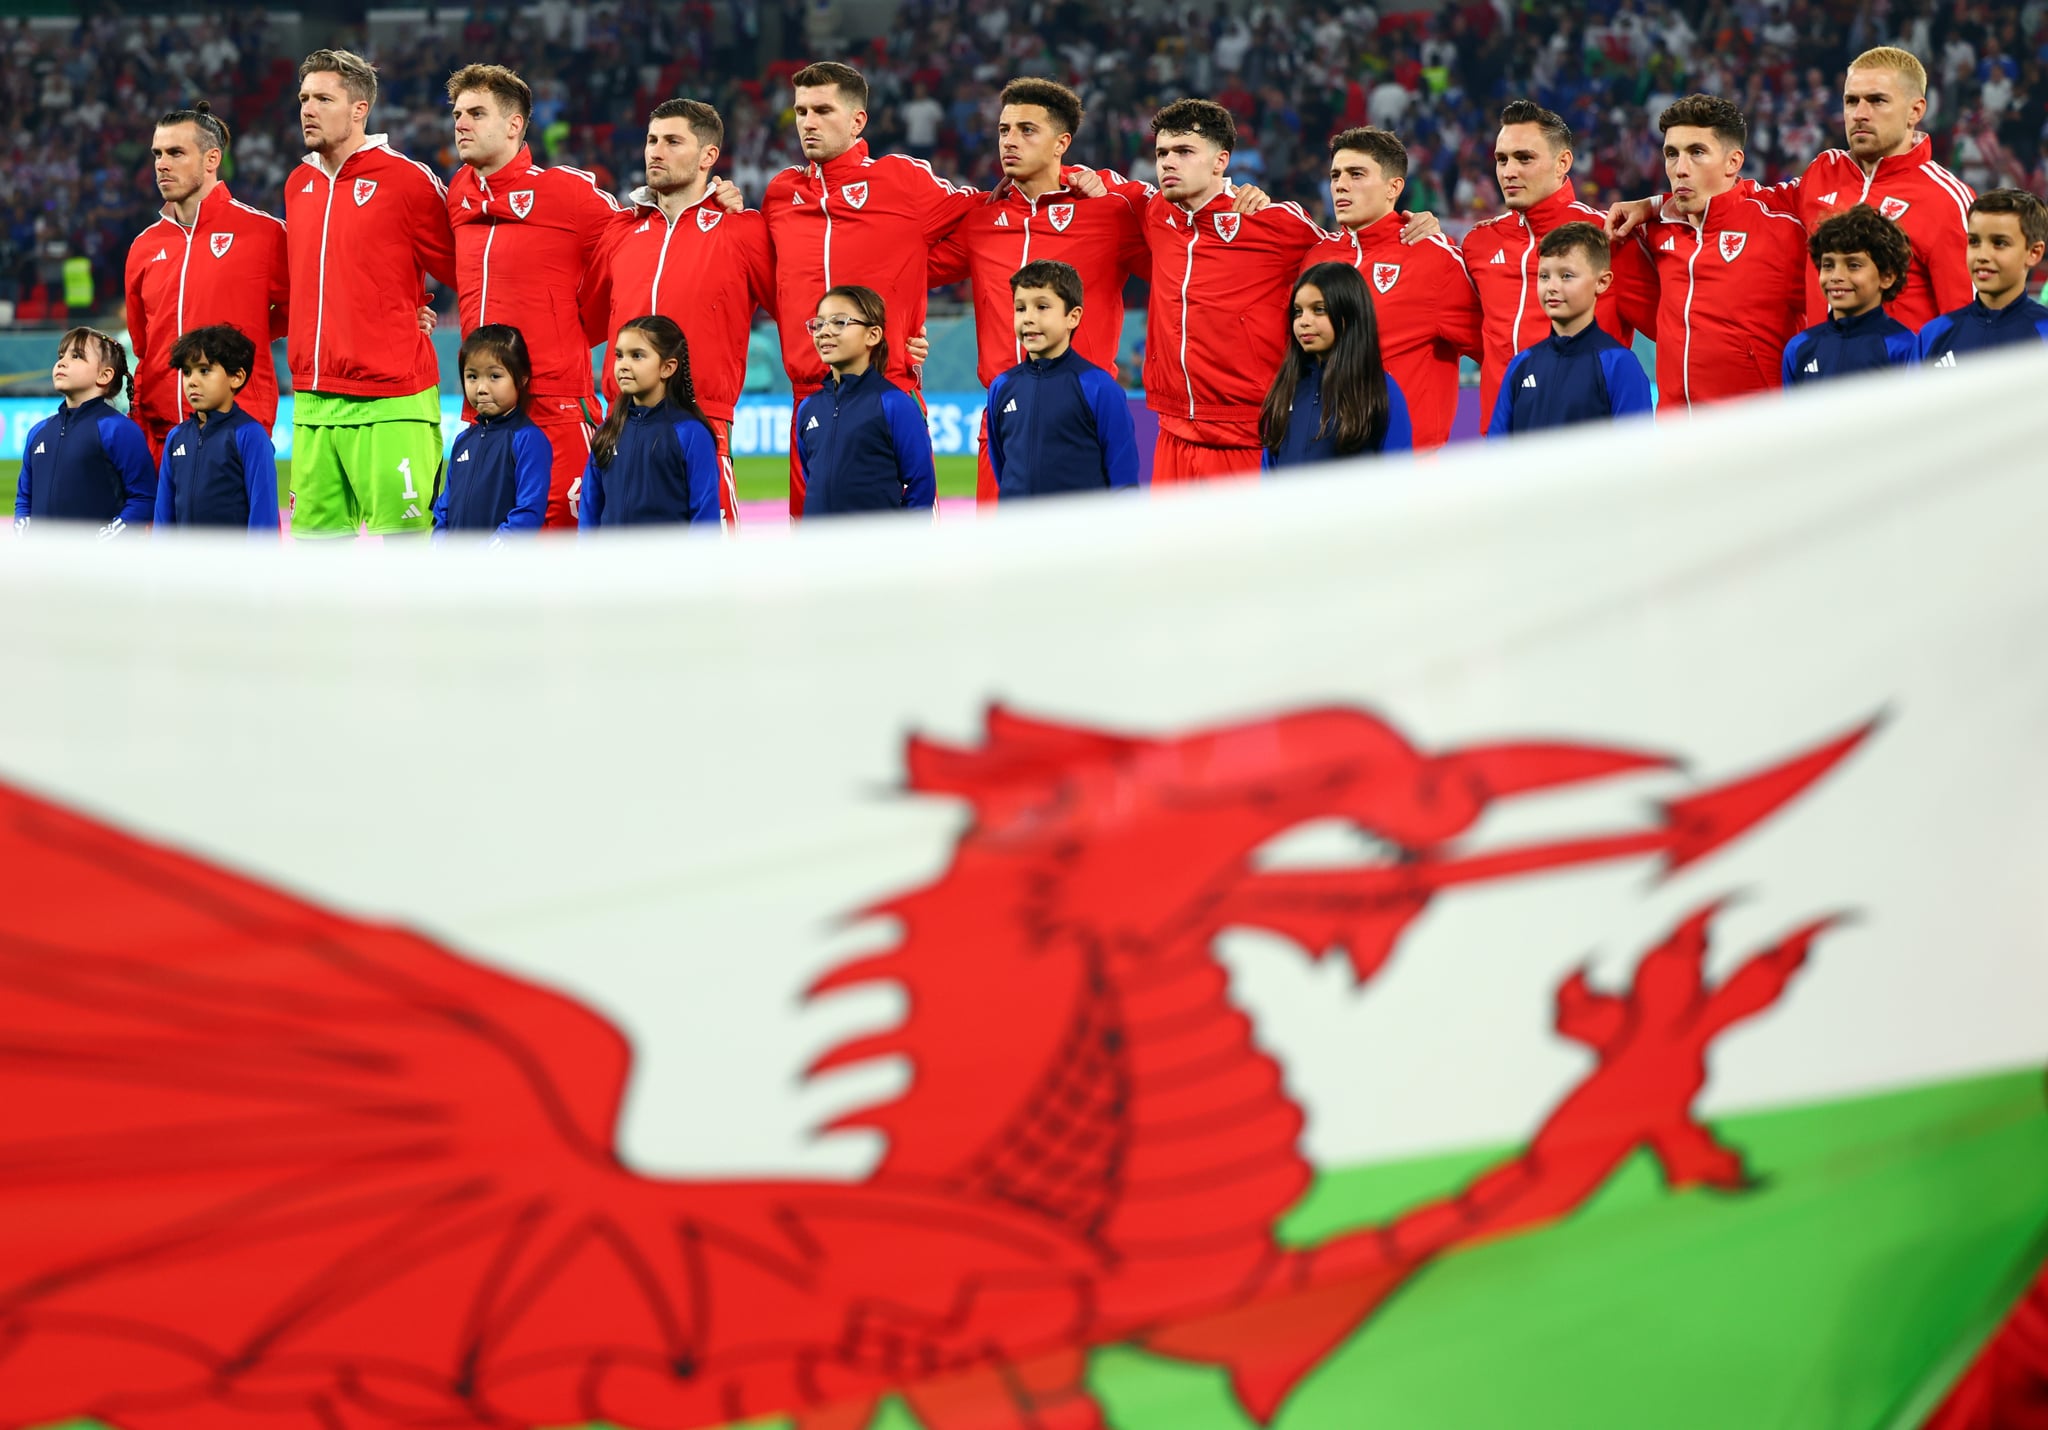 21 November 2022, Qatar, Ar-Rayyan: Soccer: World Cup, USA - Wales, Preliminary Round, Group B, Matchday 1, Ahmed bin Ali Stadium, Wales players stand with escort children behind the Welsh flag before the start of the match. Photo: Tom Weller/dpa (Photo by Tom Weller/picture alliance via Getty Images)